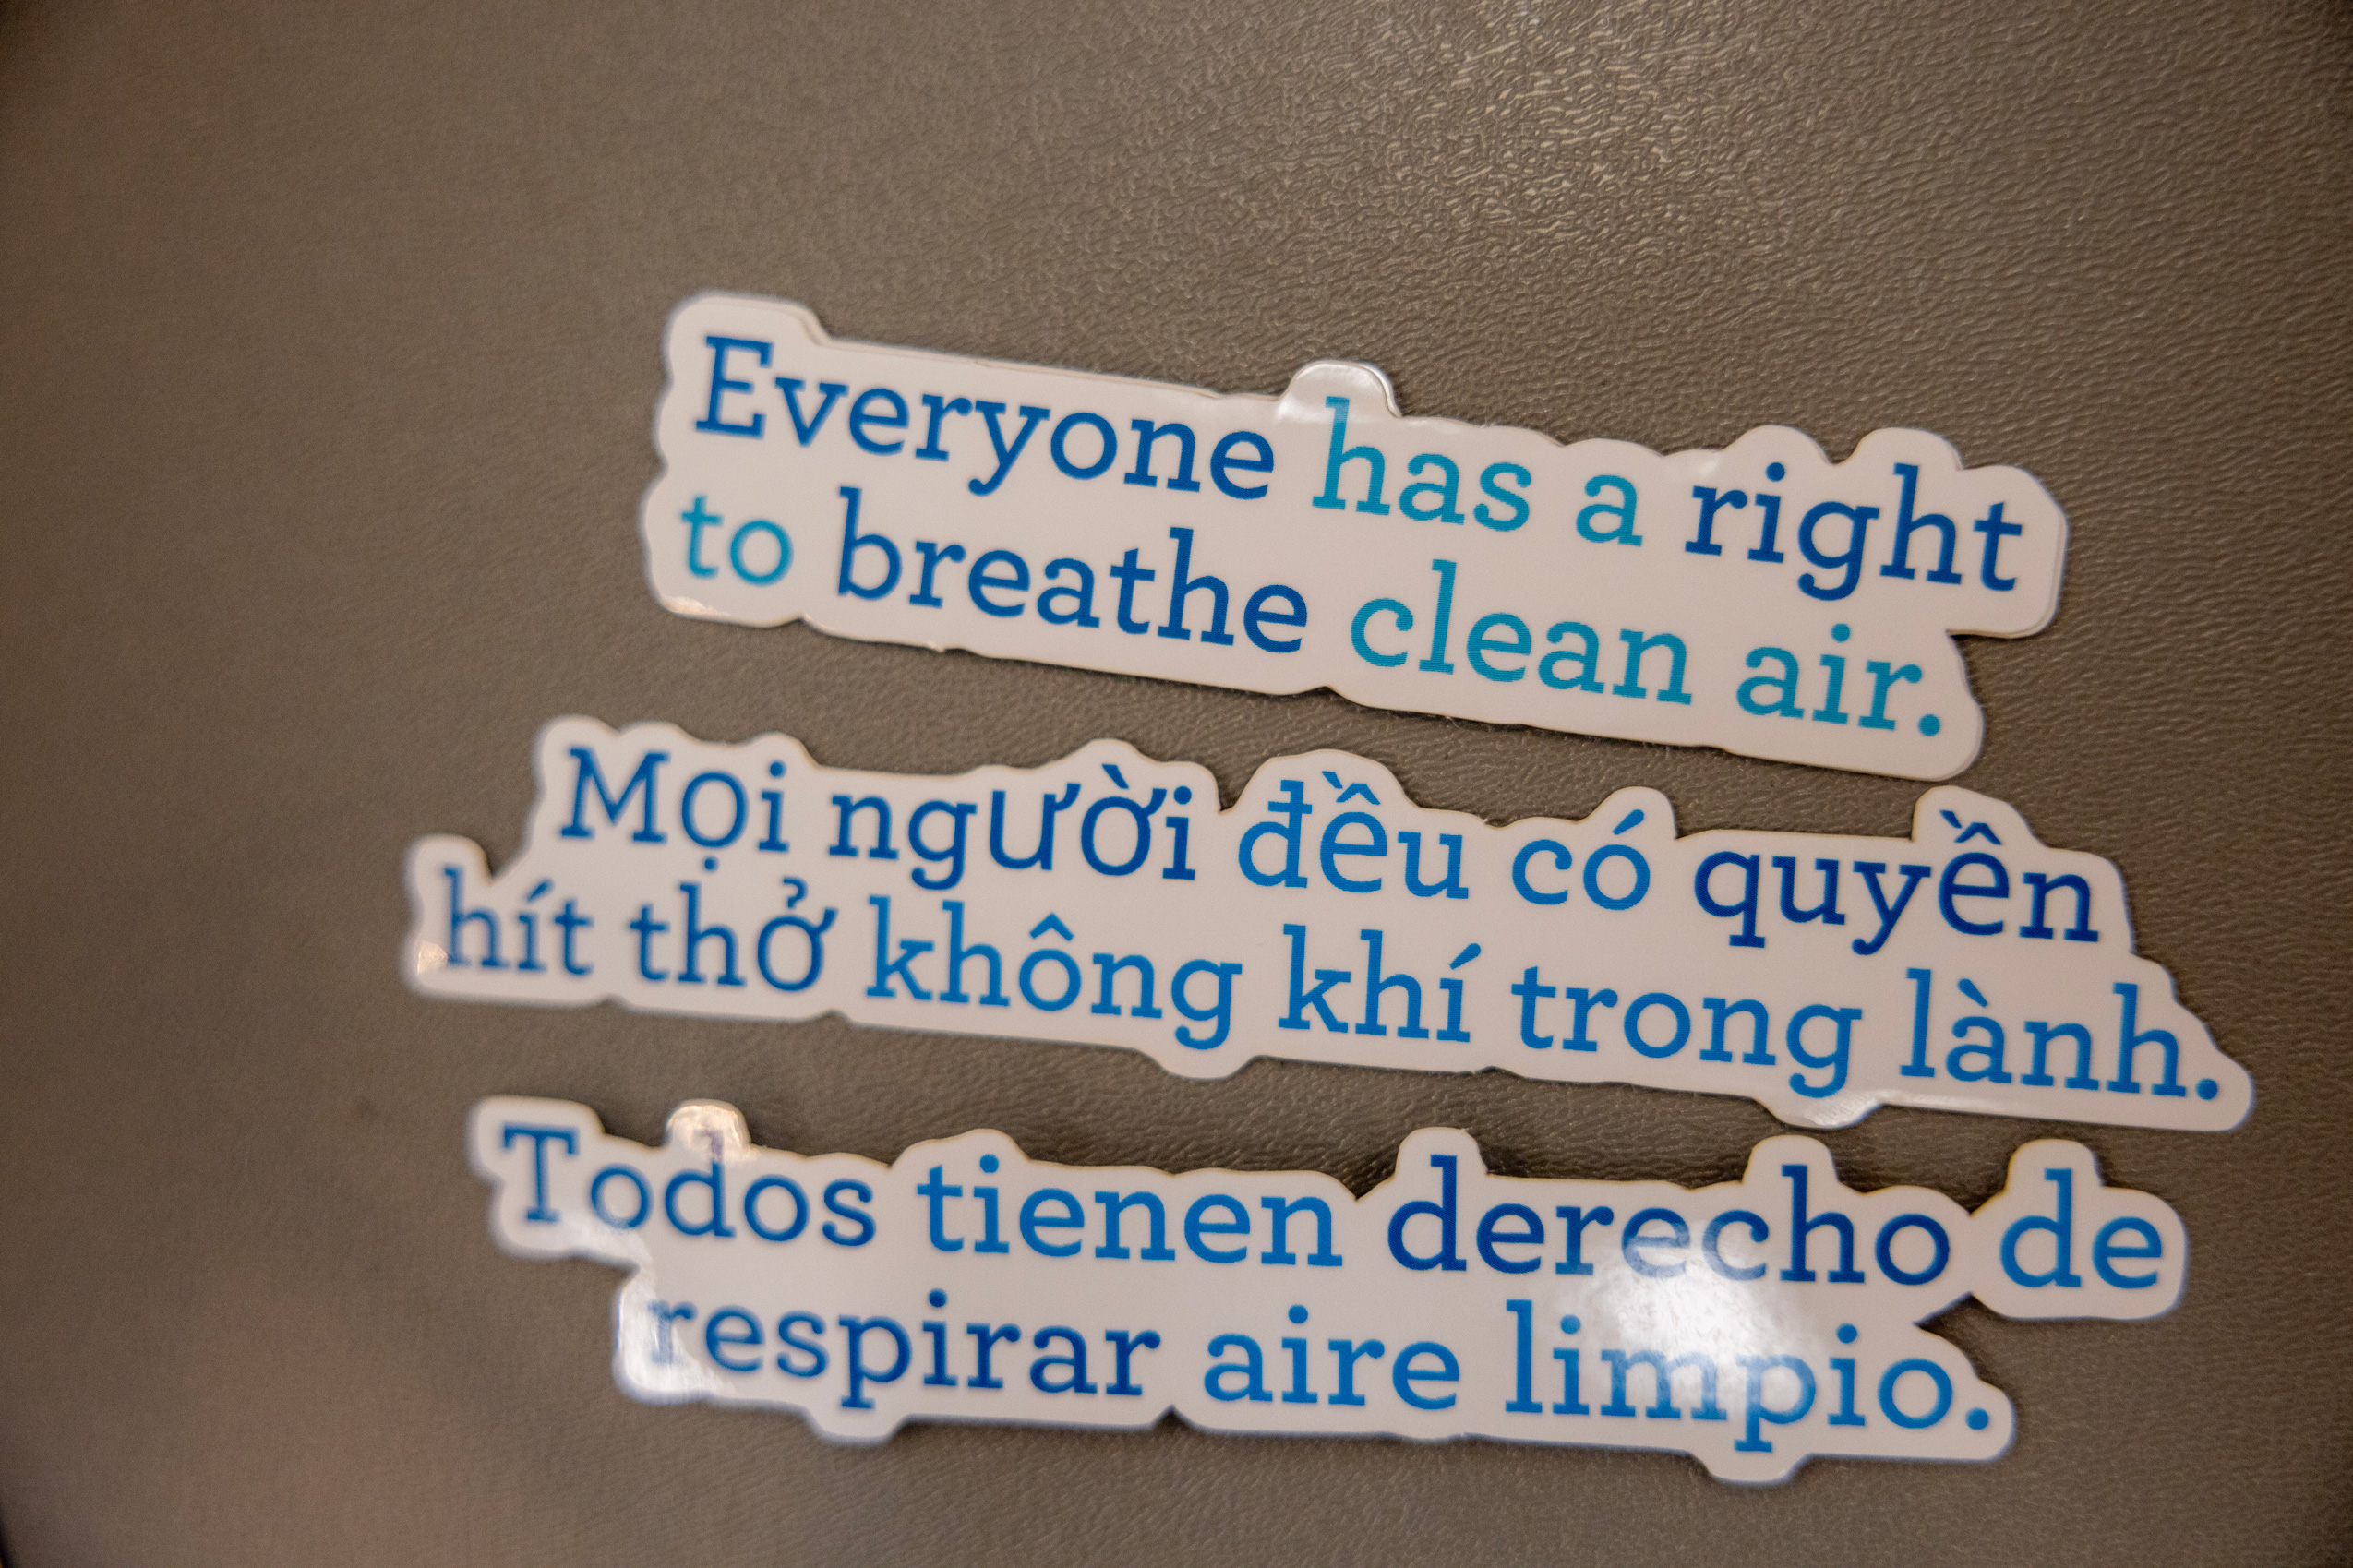 A sticker reading “Everyone has a right to breathe clean air”